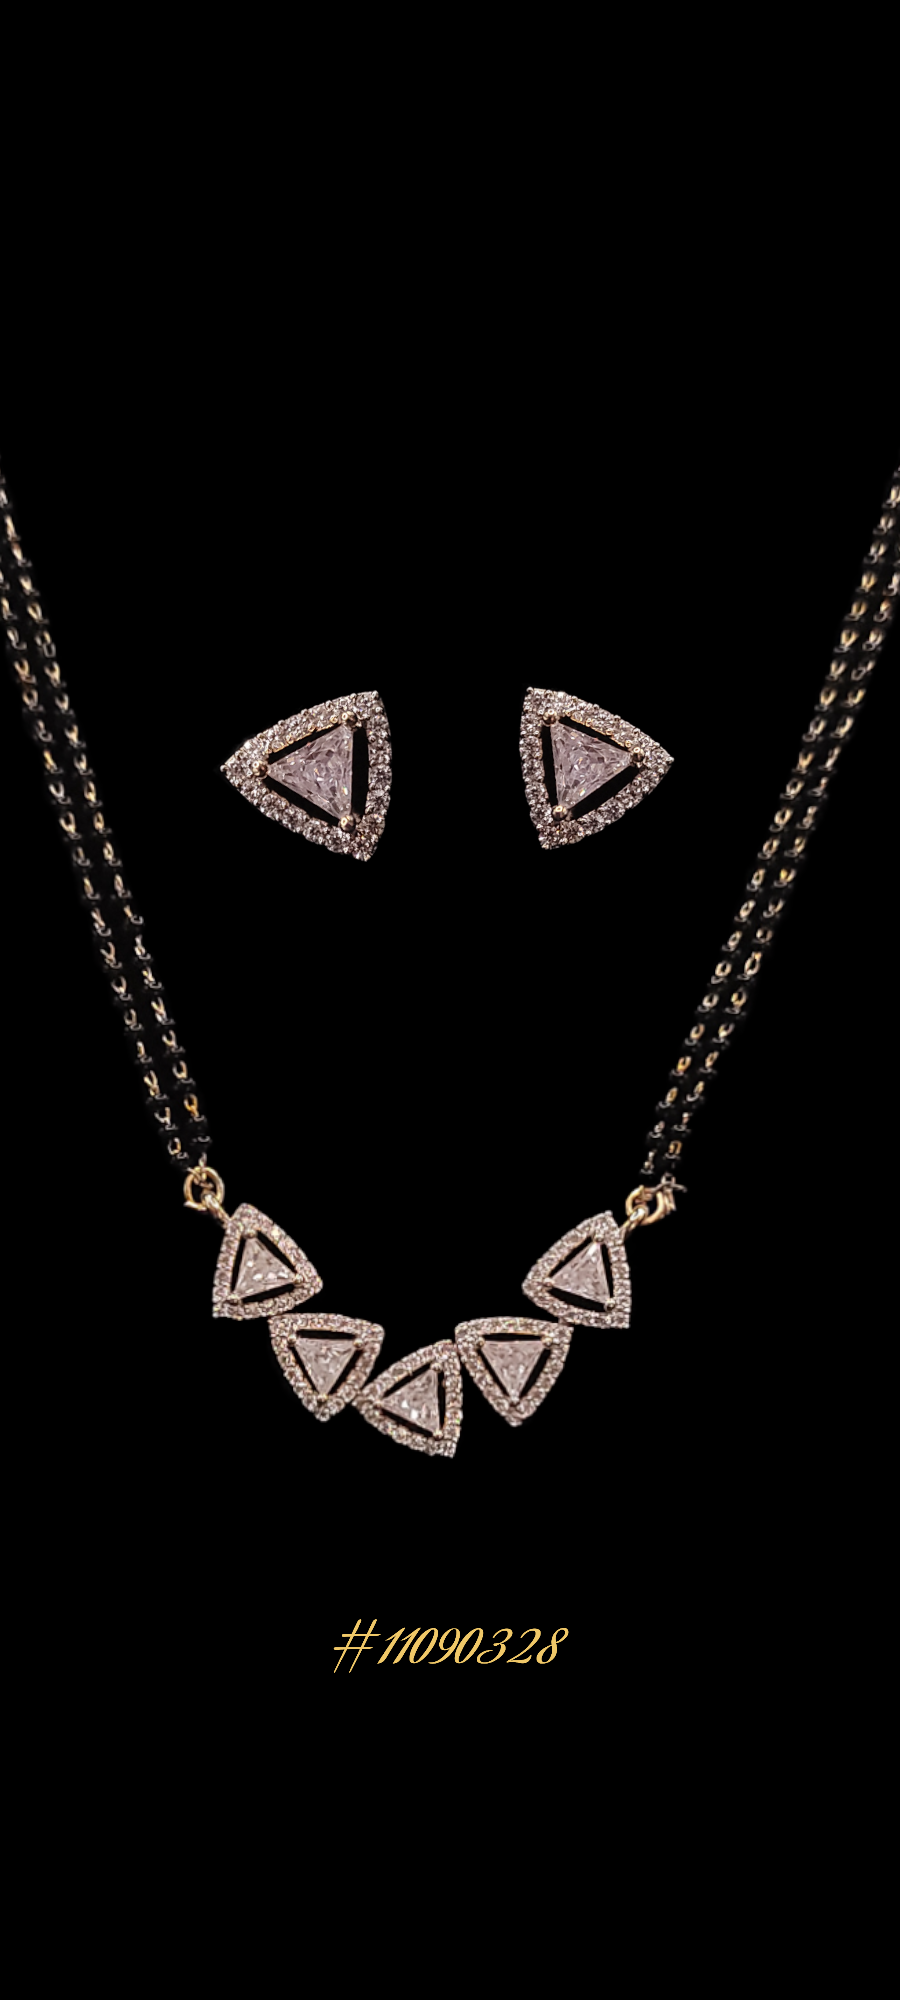 ADORABLE TRIANGLE DIAMOND DESIGN MANGALSUTRA SETS IN GOLD COLOR